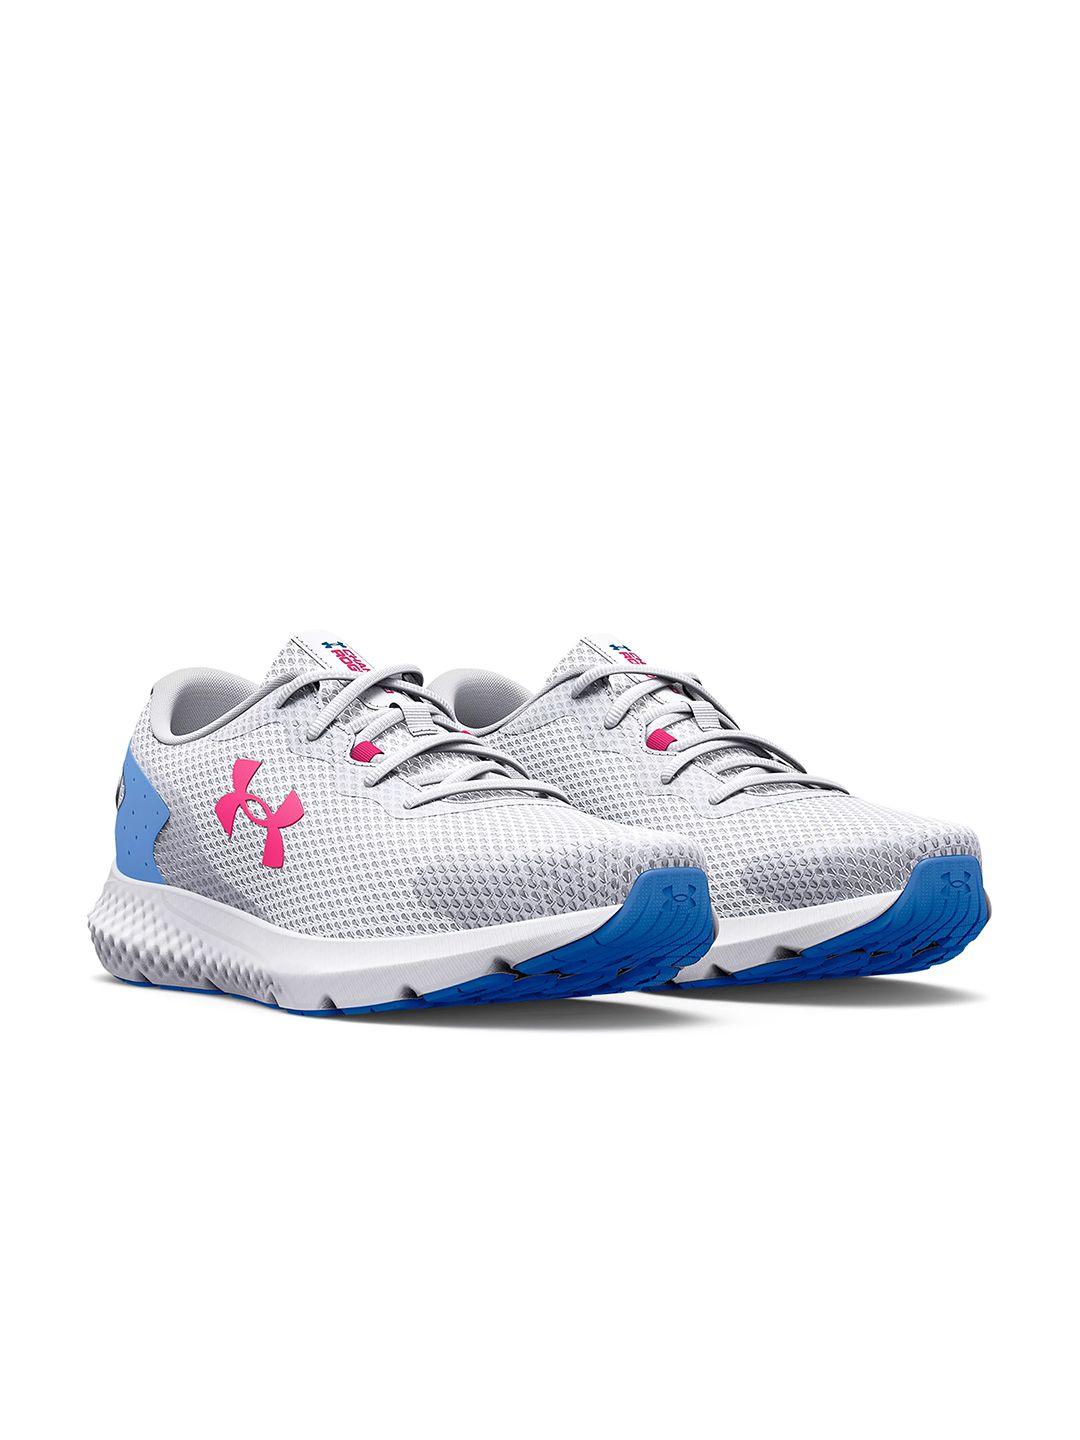 UNDER ARMOUR Women White Charged Rogue 3 IRID Running Shoes Price in India